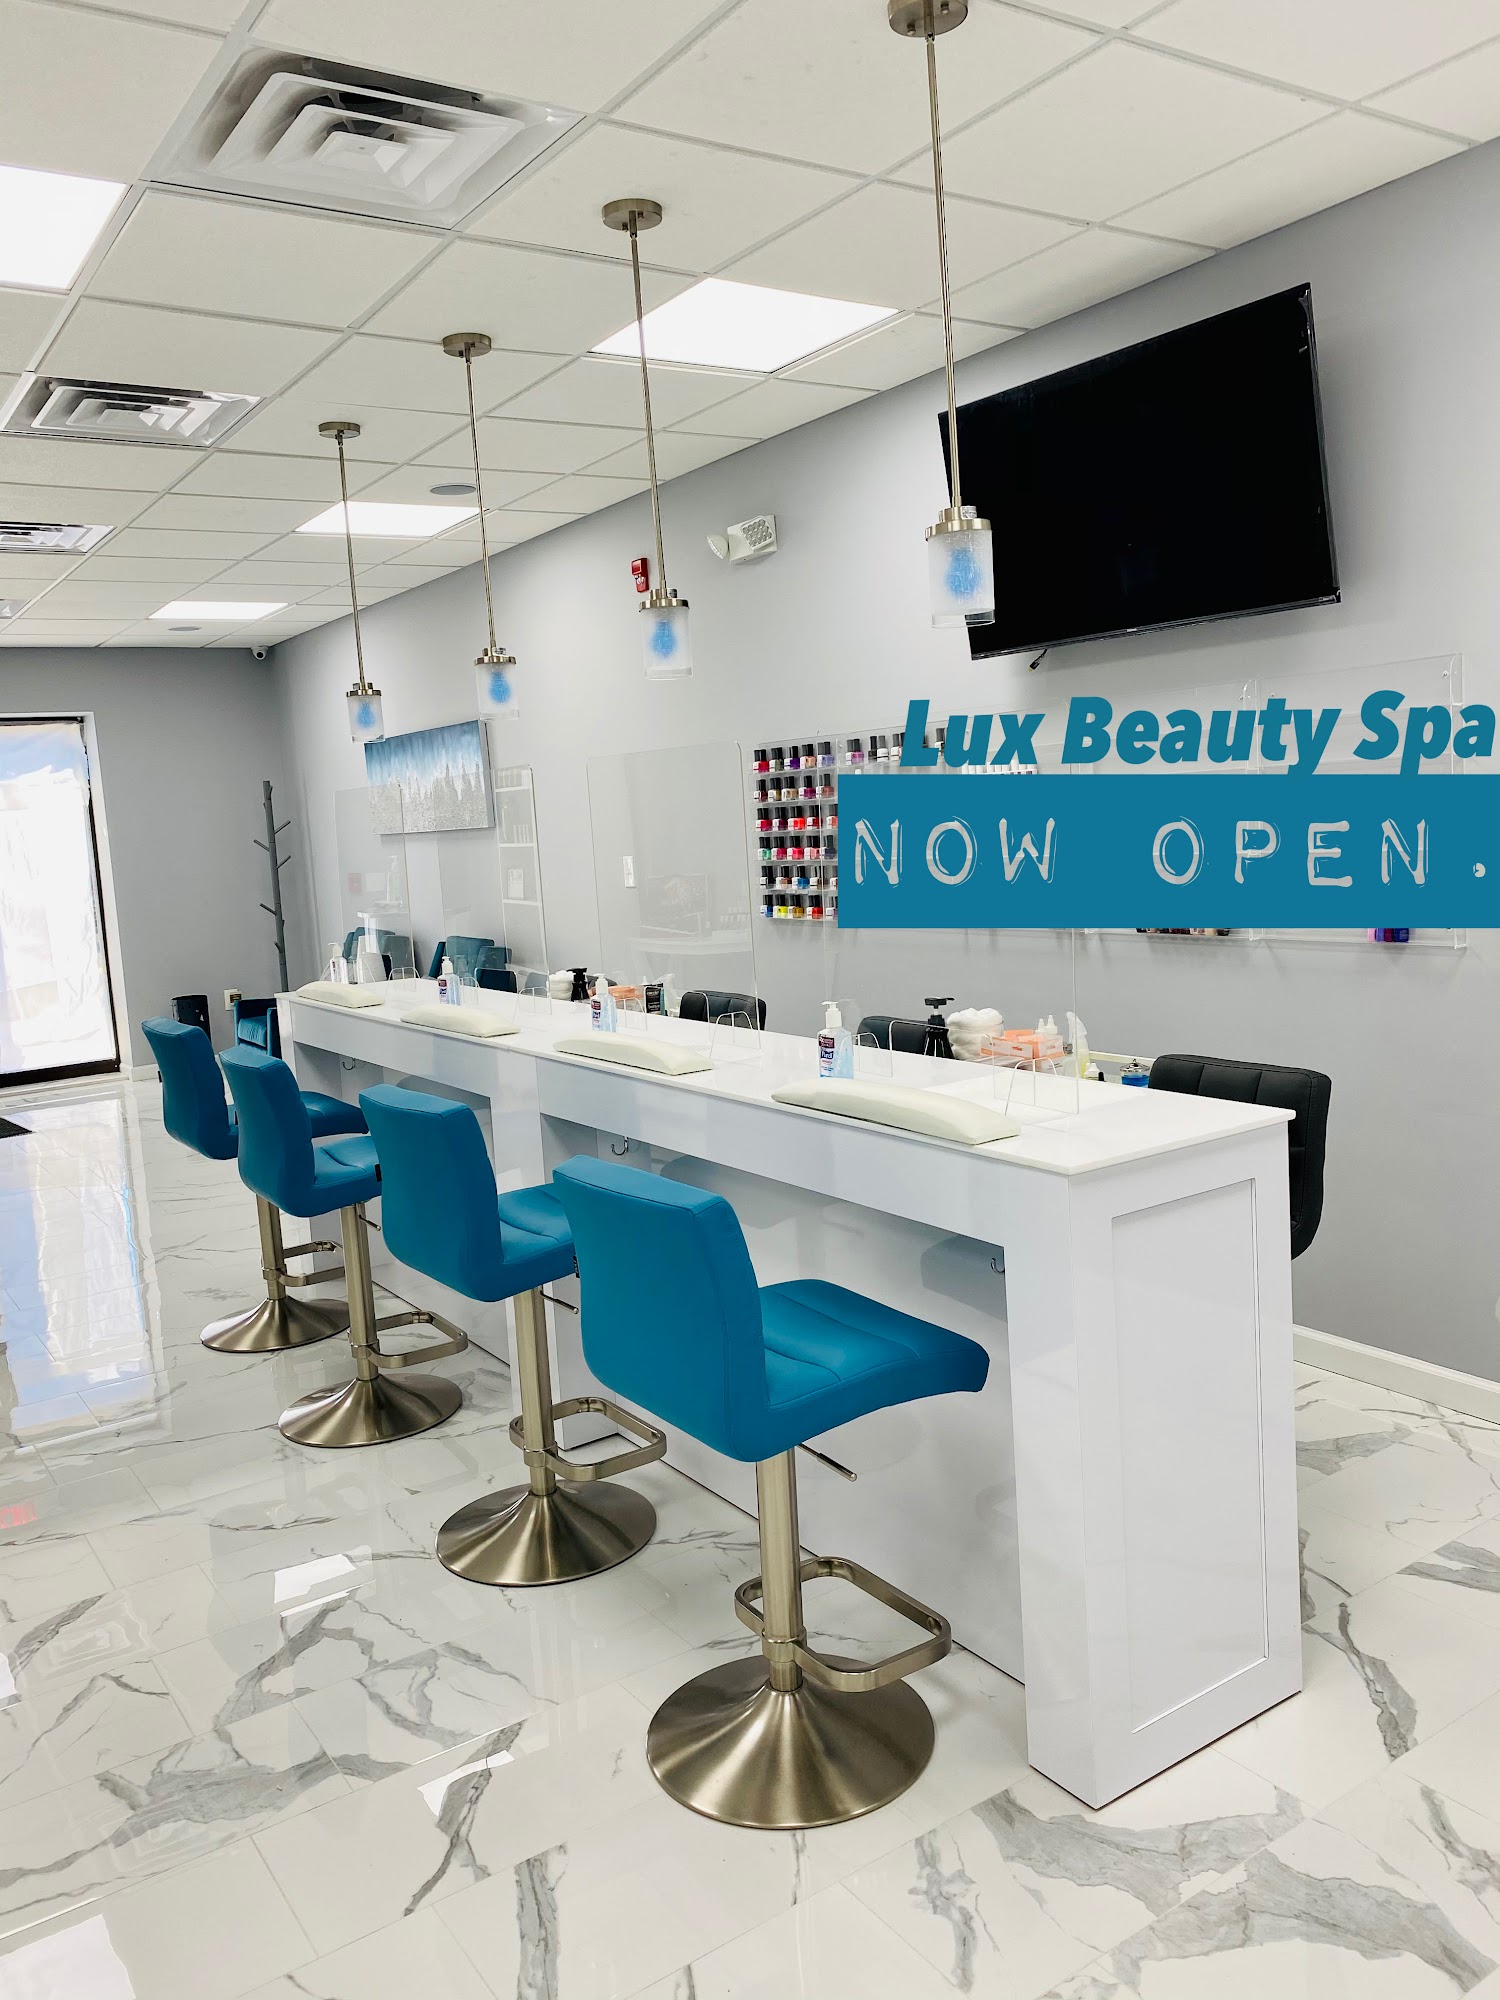 Lux beauty spa 1250 Paterson Plank Rd, Secaucus New Jersey 07094